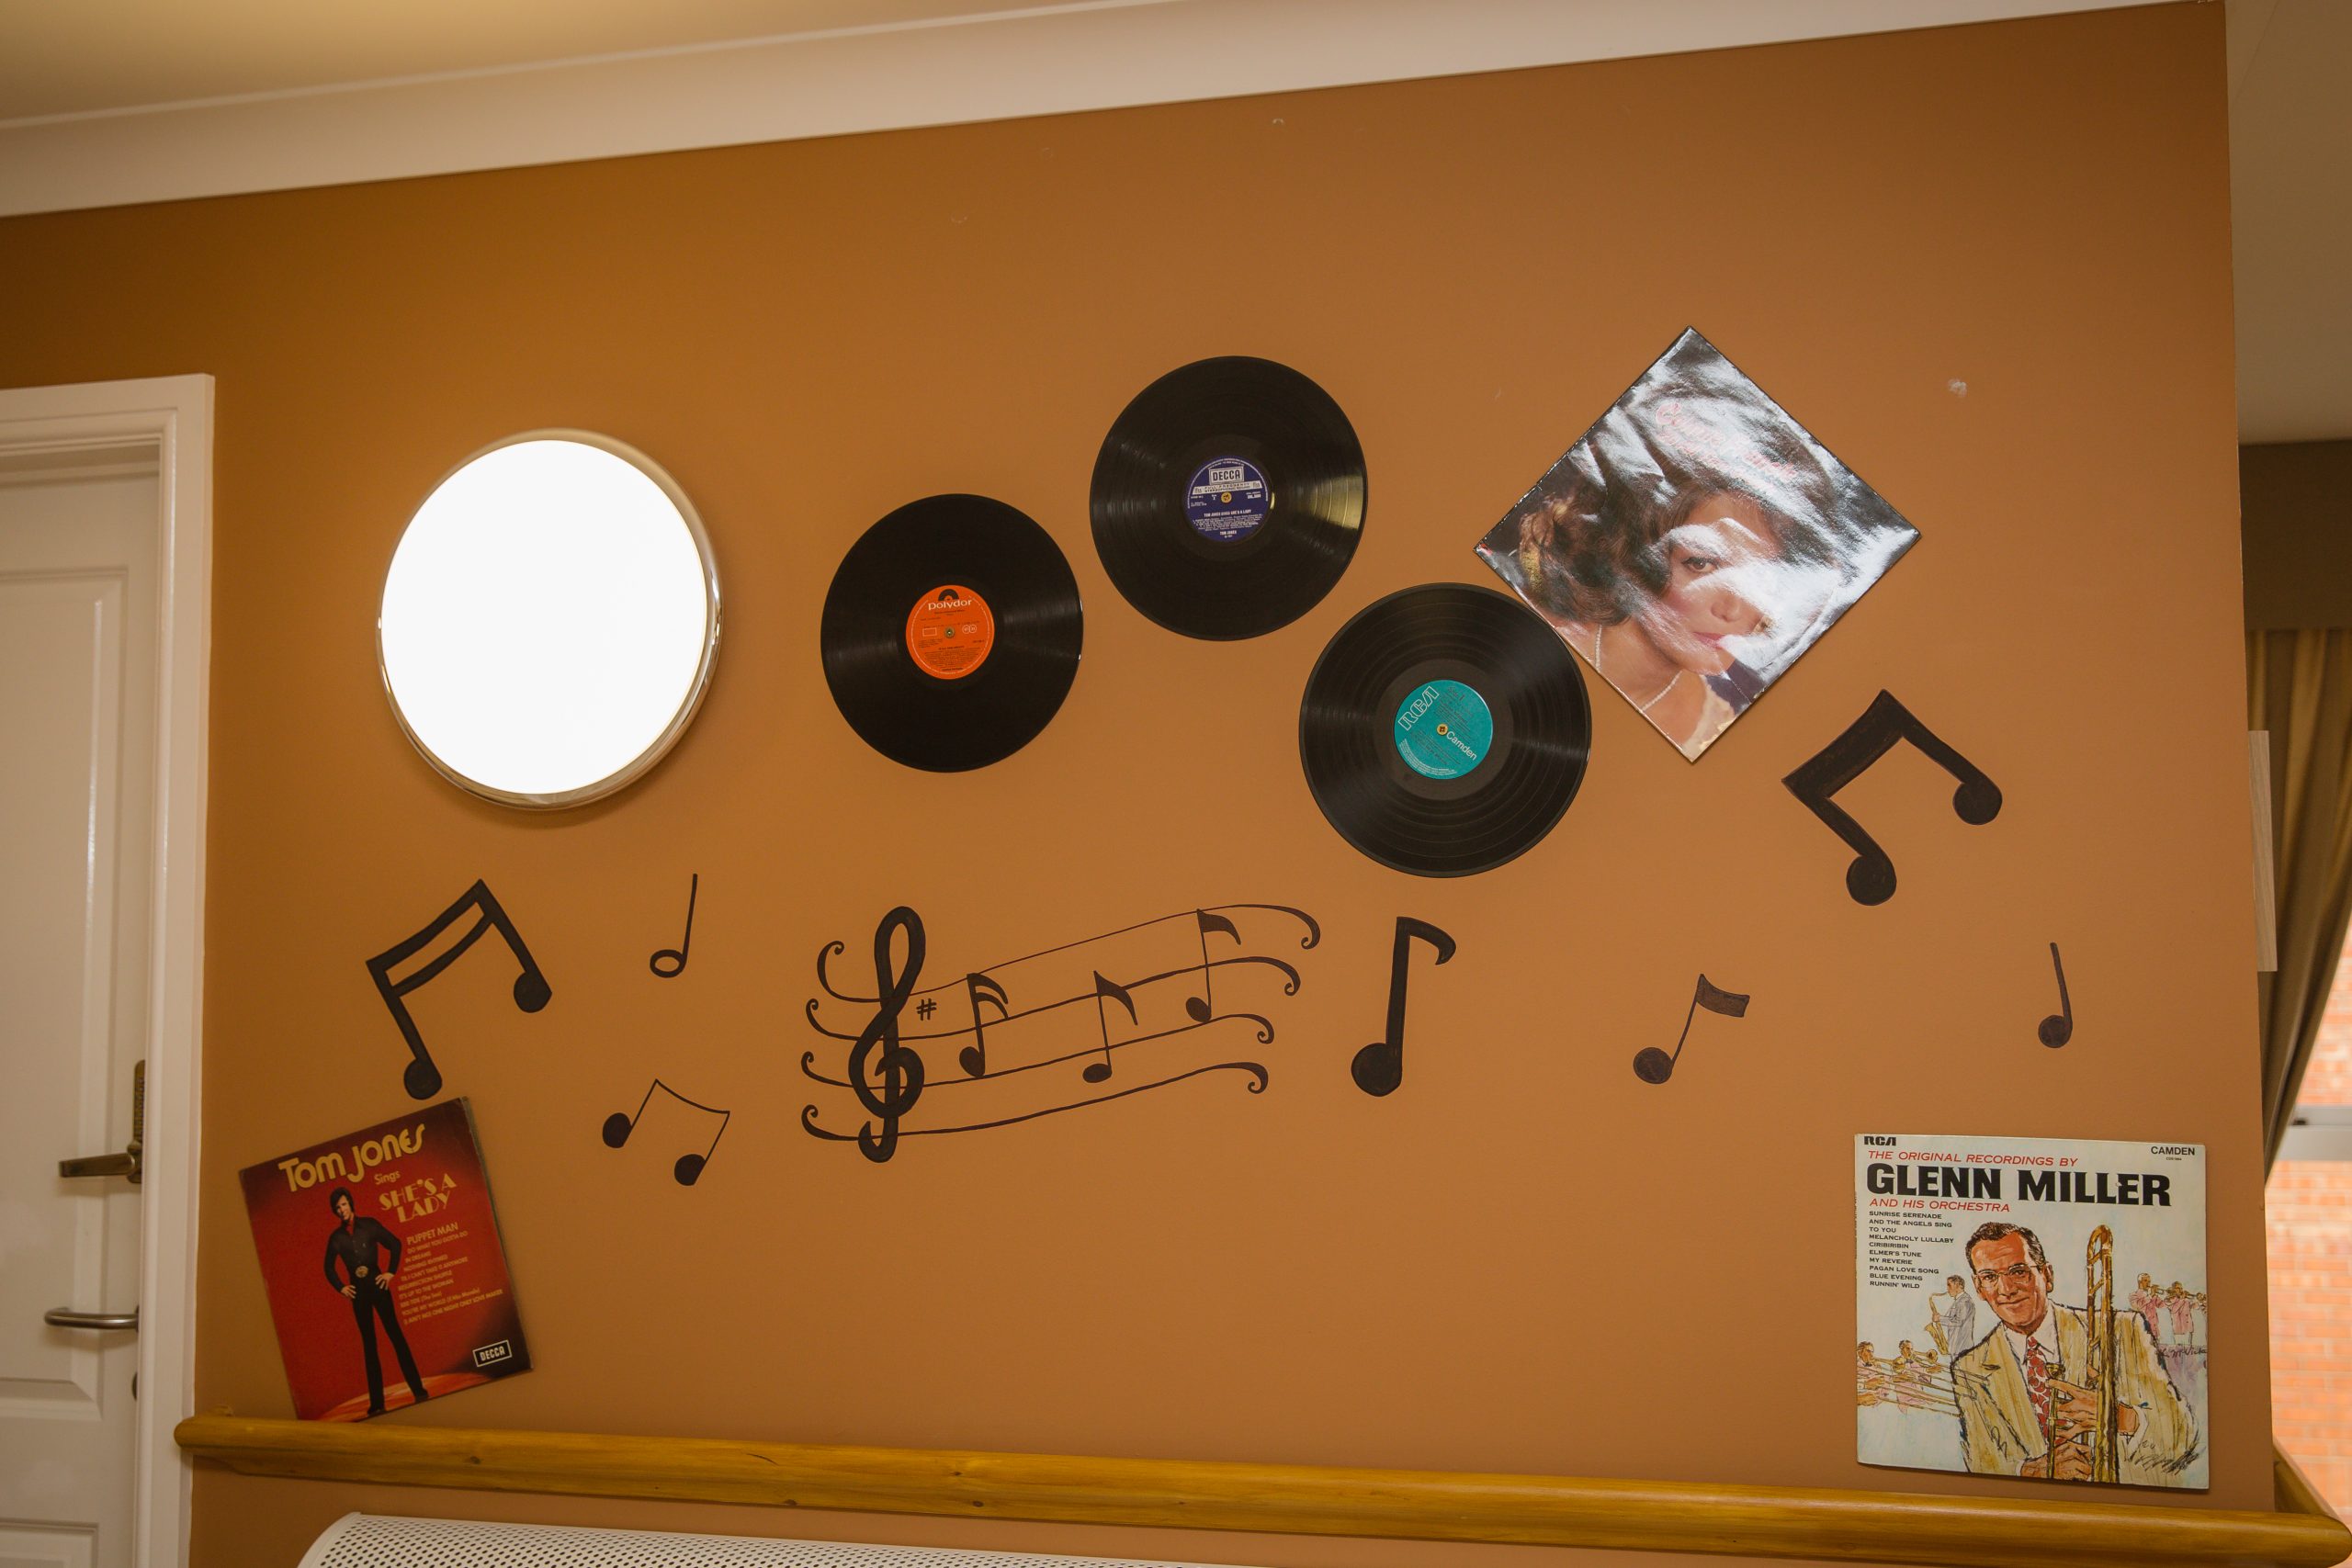 Three records on the wall with music symbols surrounding them.